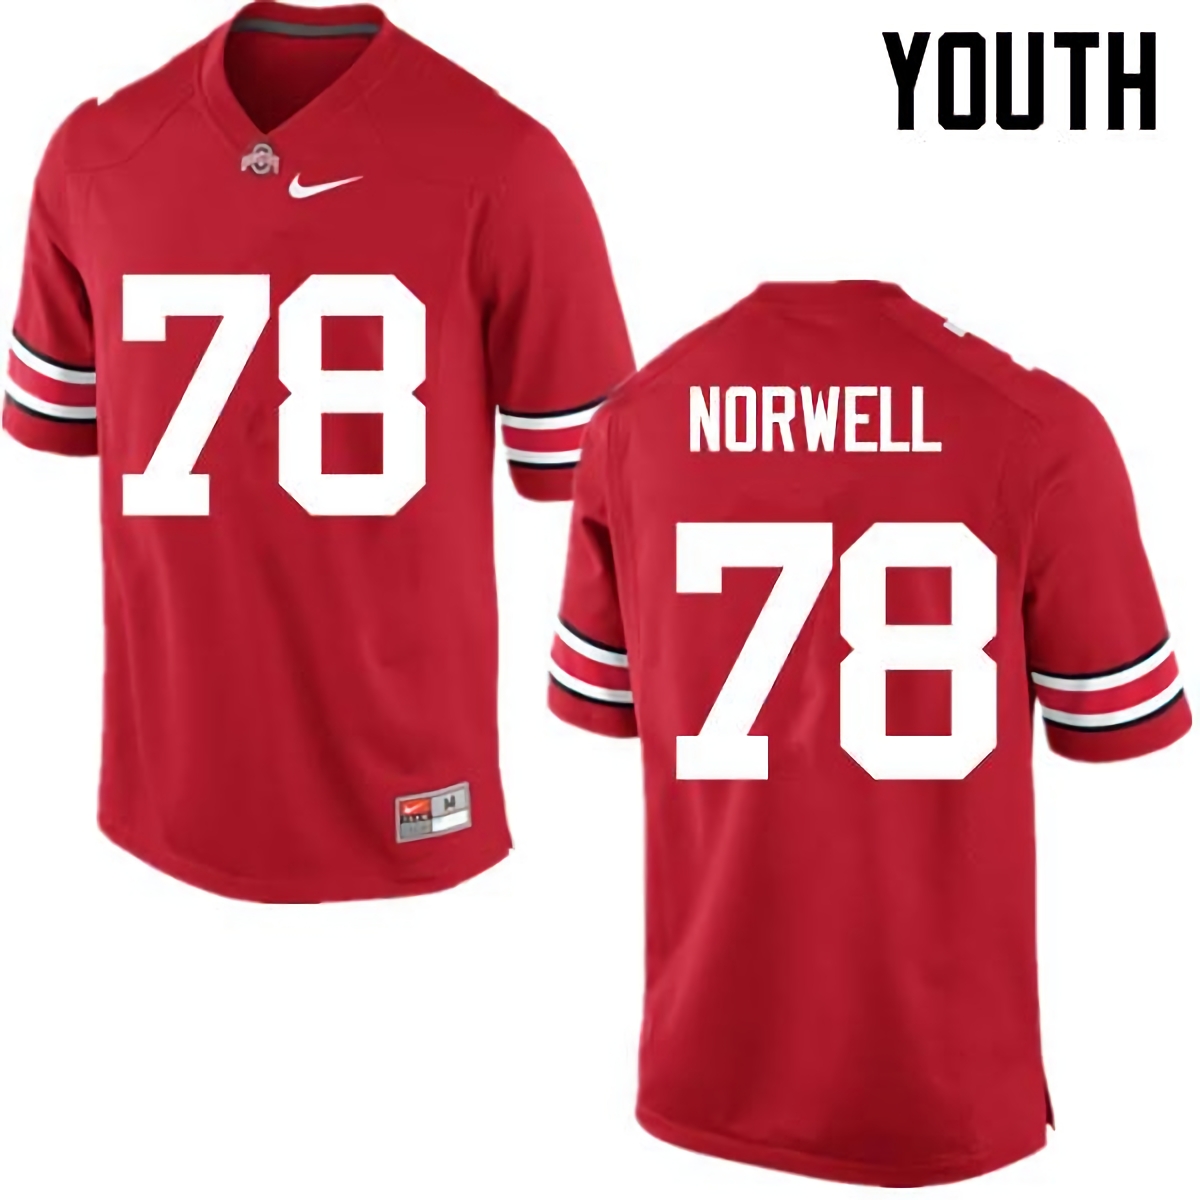 Andrew Norwell Ohio State Buckeyes Youth NCAA #78 Nike Red College Stitched Football Jersey LFO6656UT